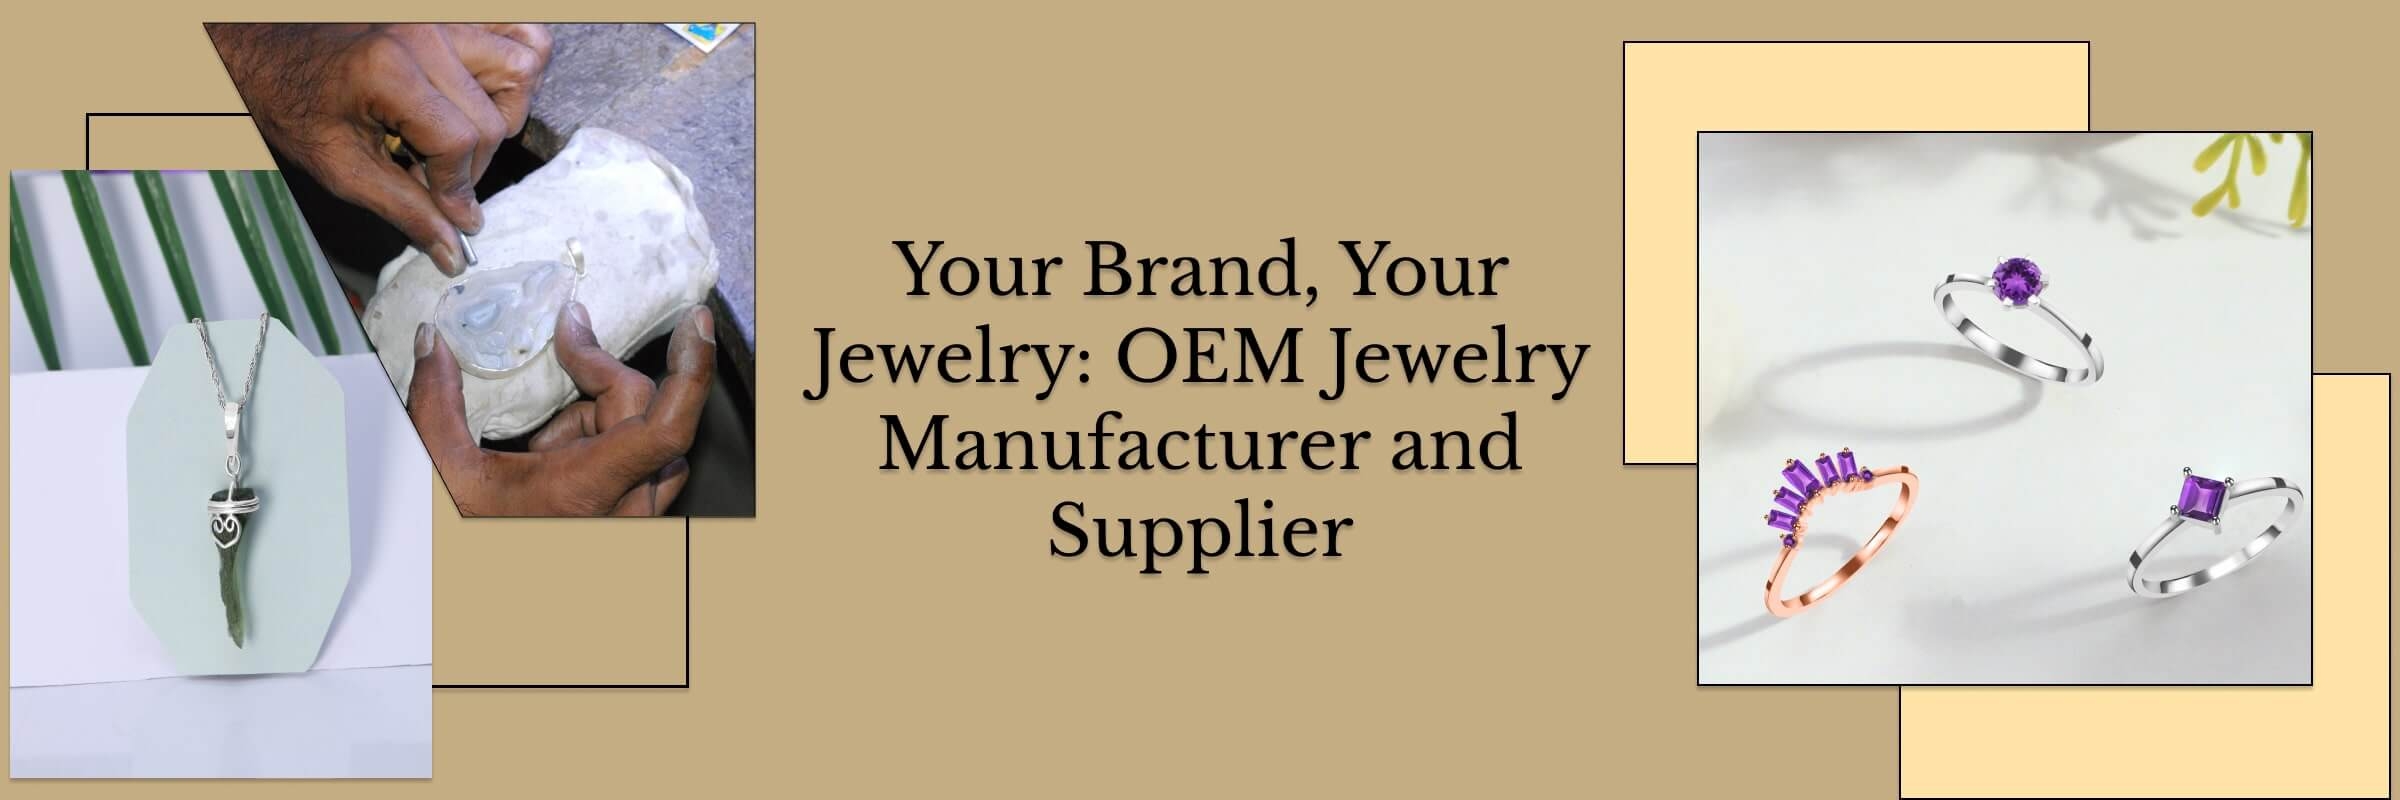 OEM Jewelry Manufacturer and Supplier - Custom Creations For Your Brand